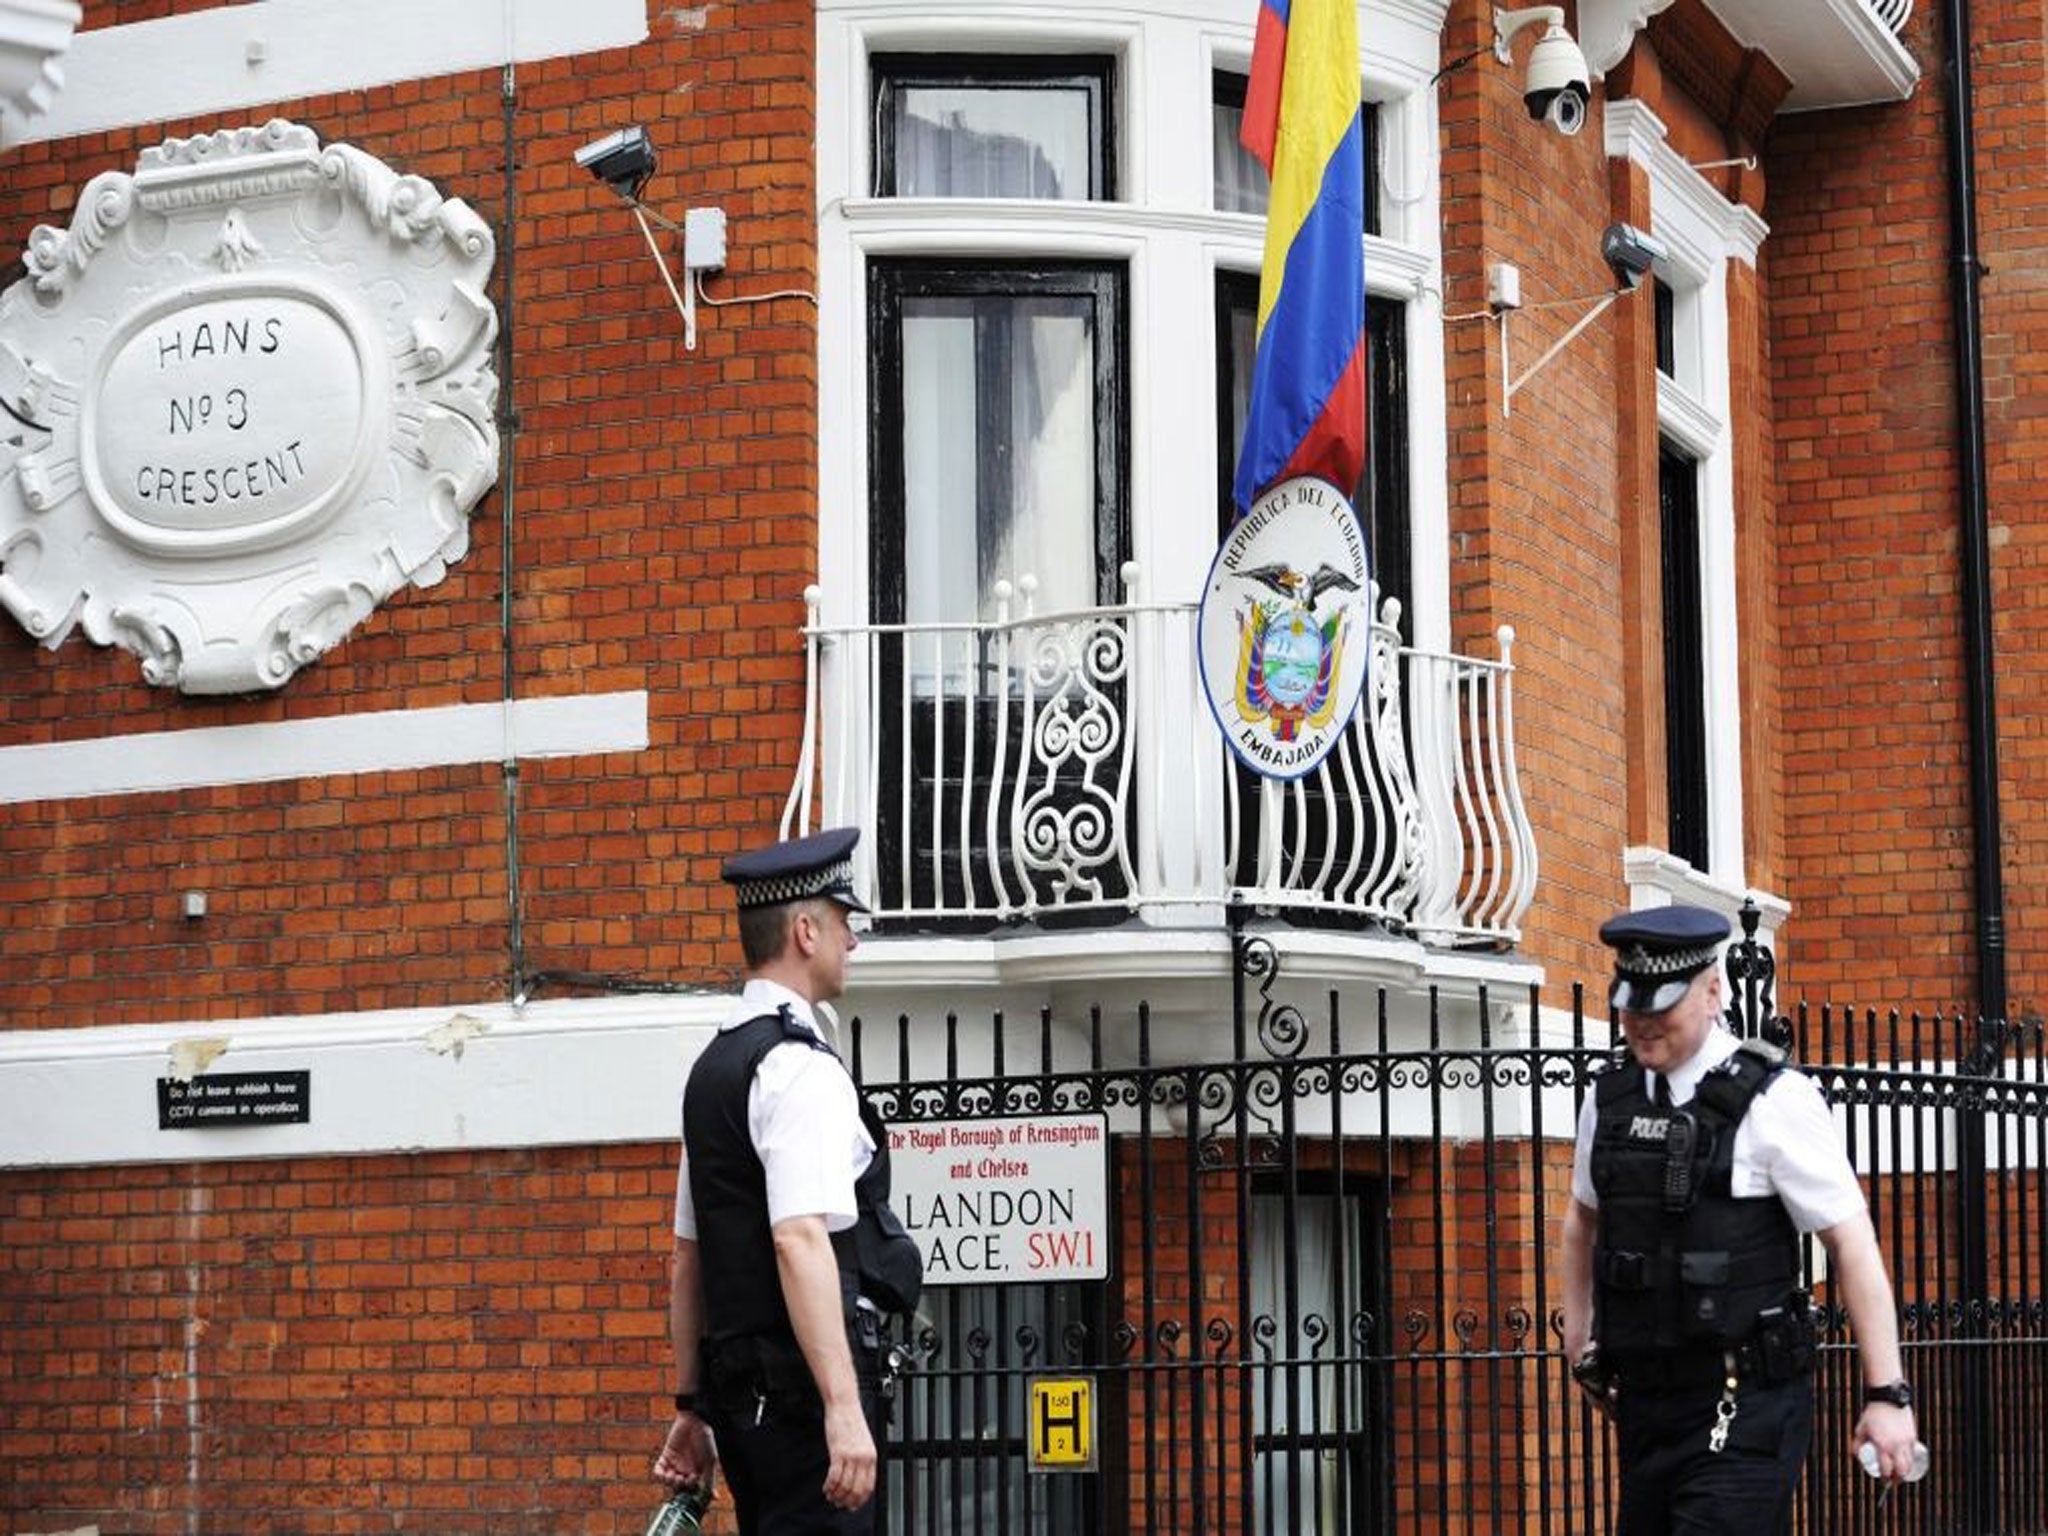 The Ecuadorean Embassy will reveal on Wednesday who controls a hidden microphone discovered there